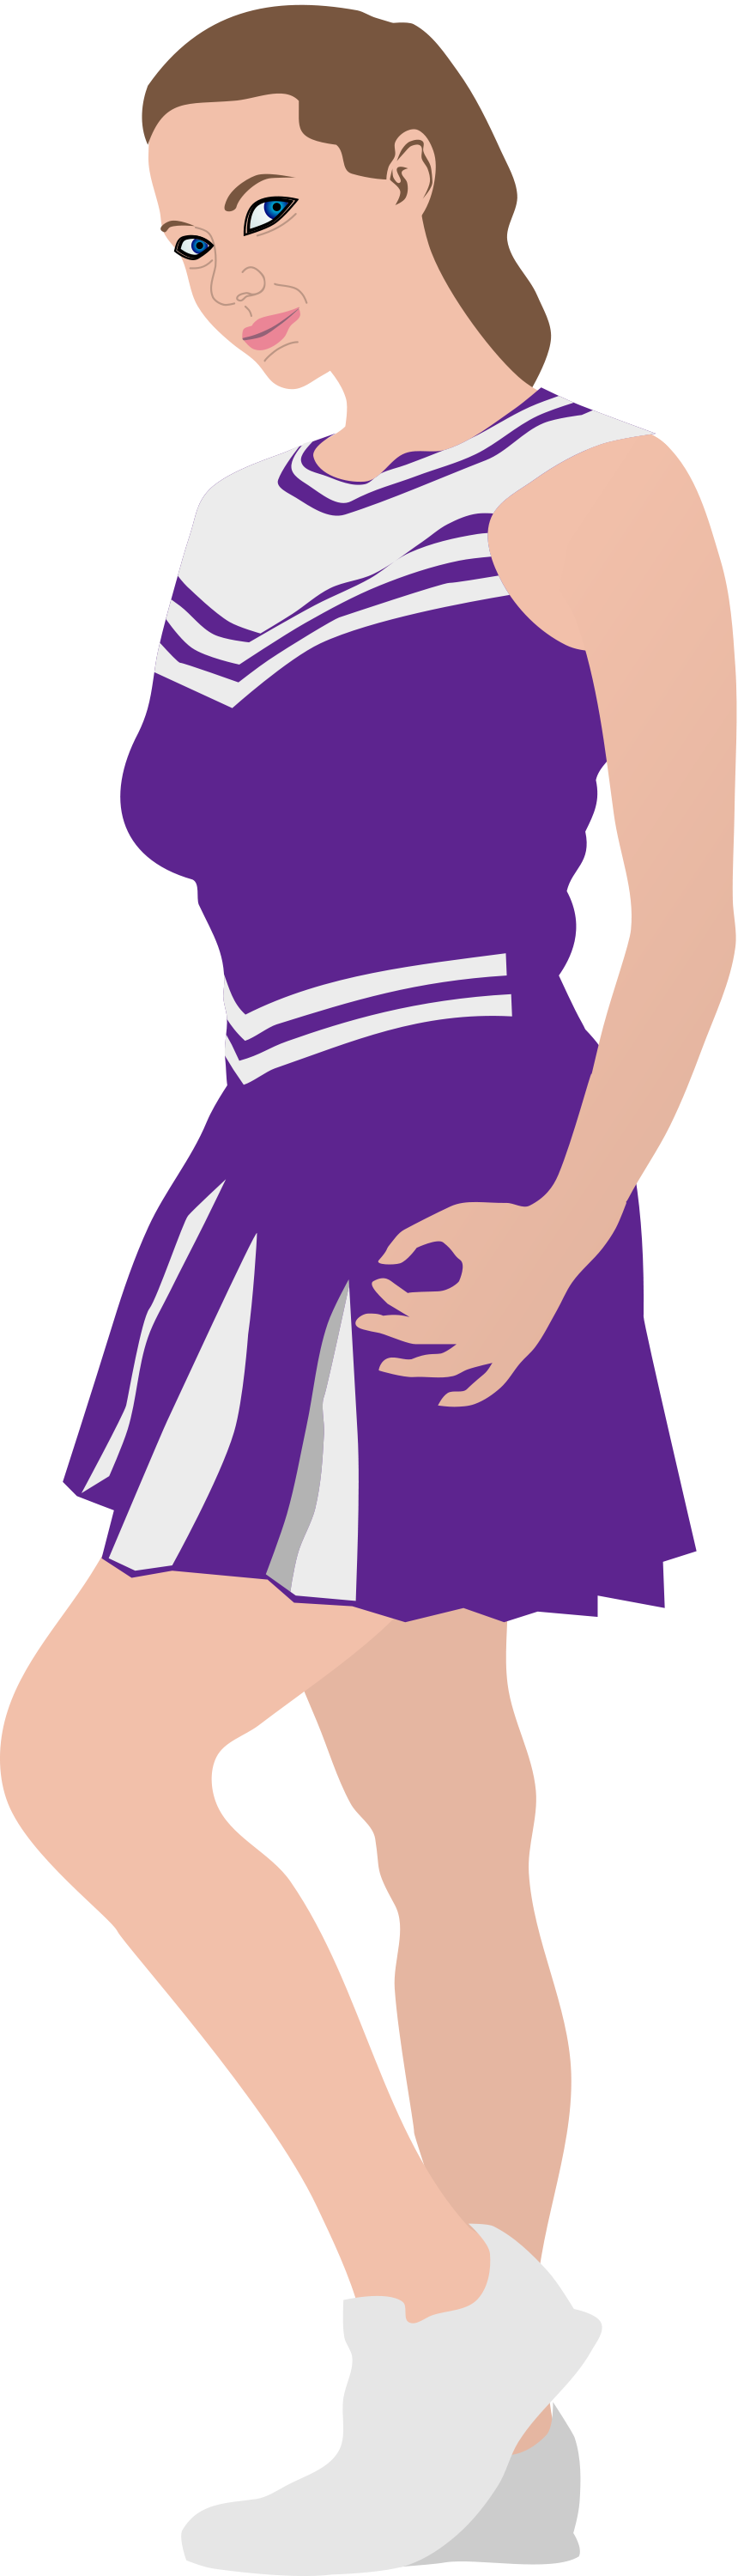 Similar Images For Cheerleader Clip Art - Cheerleading Clipart Transparent Background (860x3000)